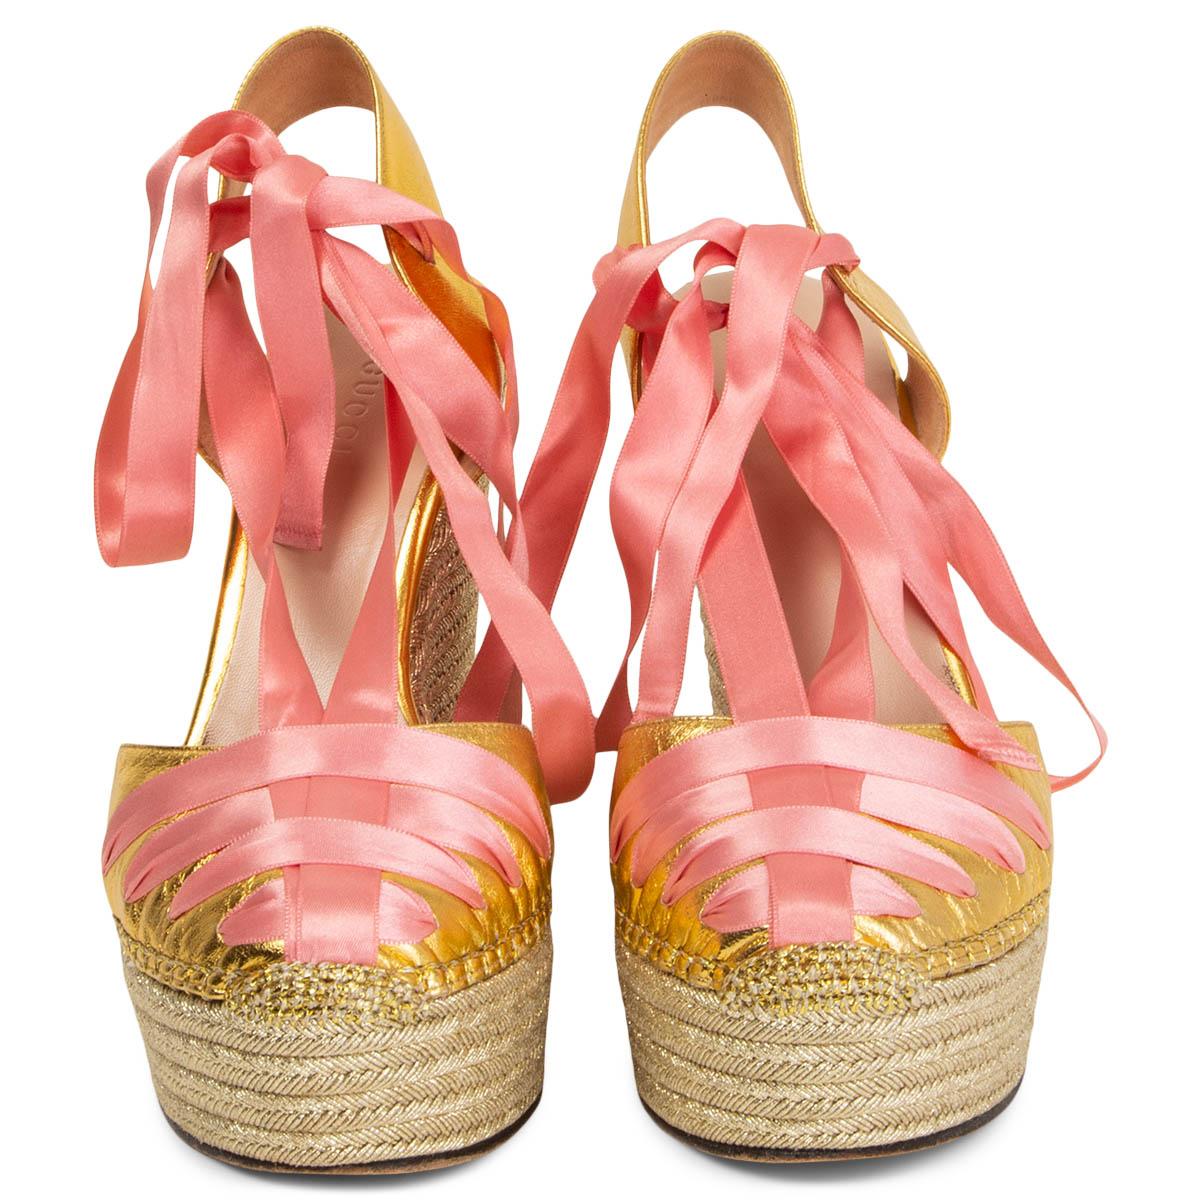 100% authentic Gucci Alexis wrap platform wedge sandals in metallic gold-tone leather and a raffia sole. Embellished with a baby pink ribbon tie. Have been worn and are in excellent condition. Come with dust bag. 

Measurements
Imprinted